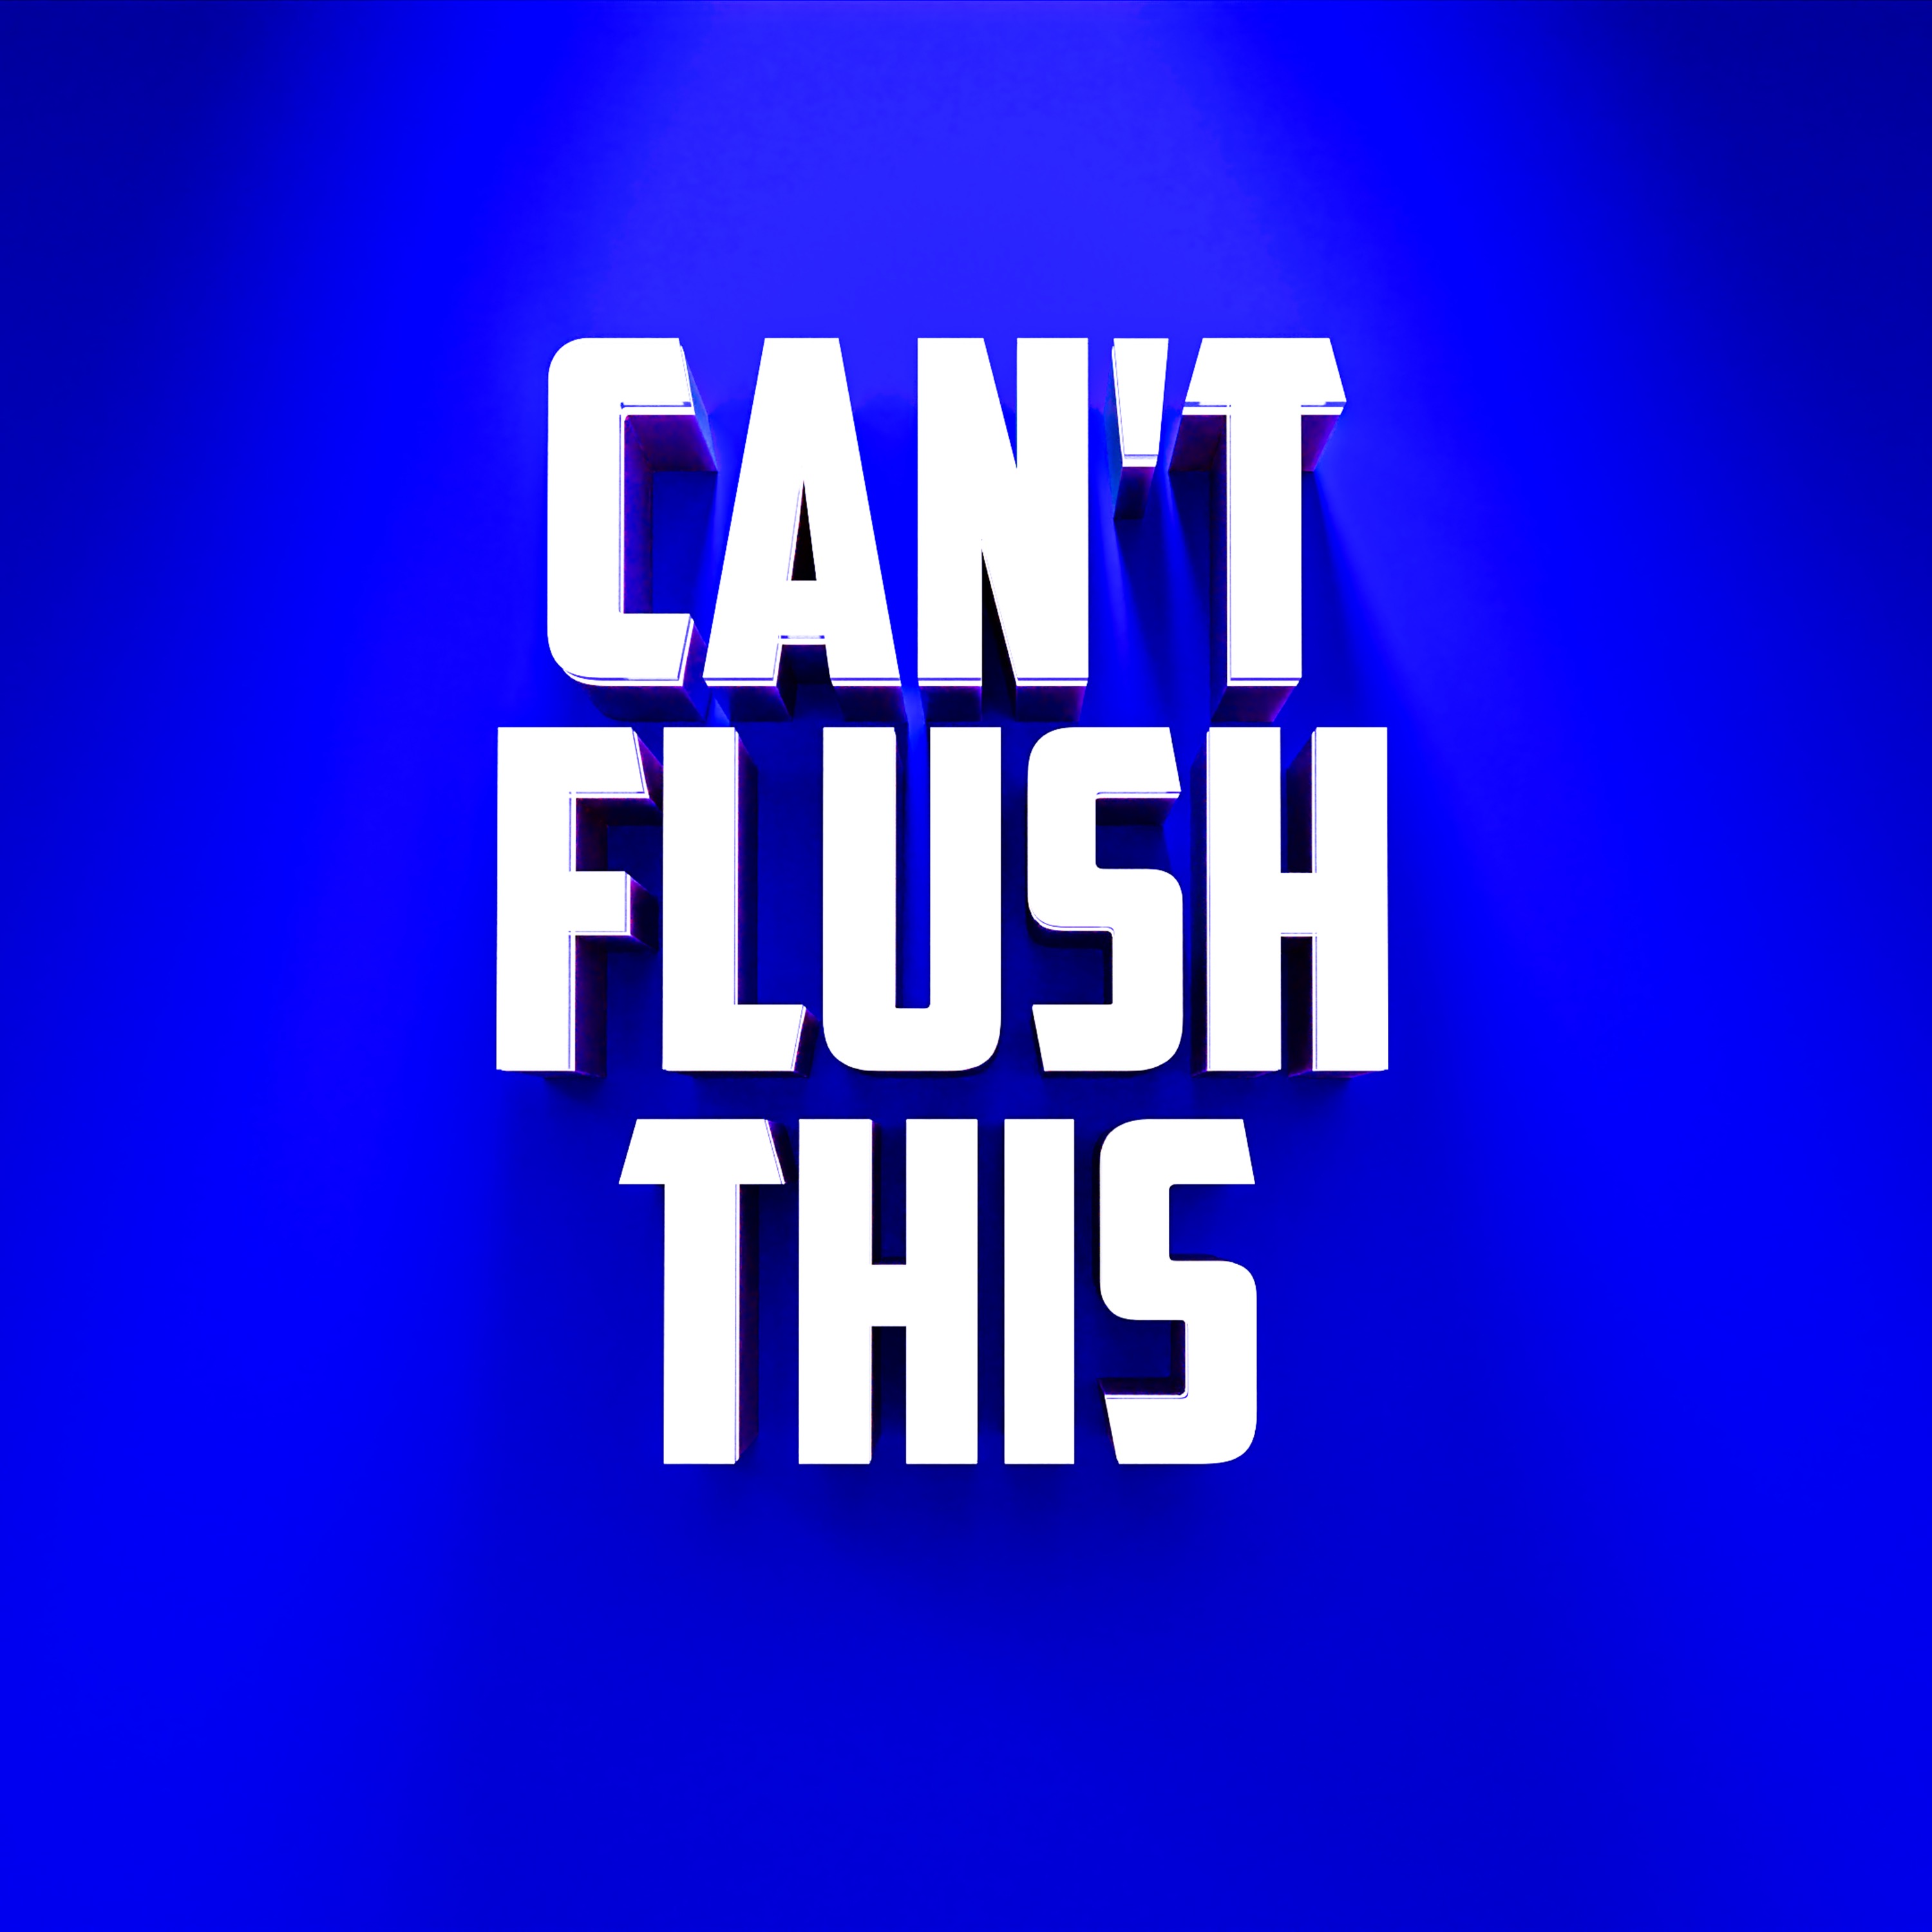 Can't Flush This